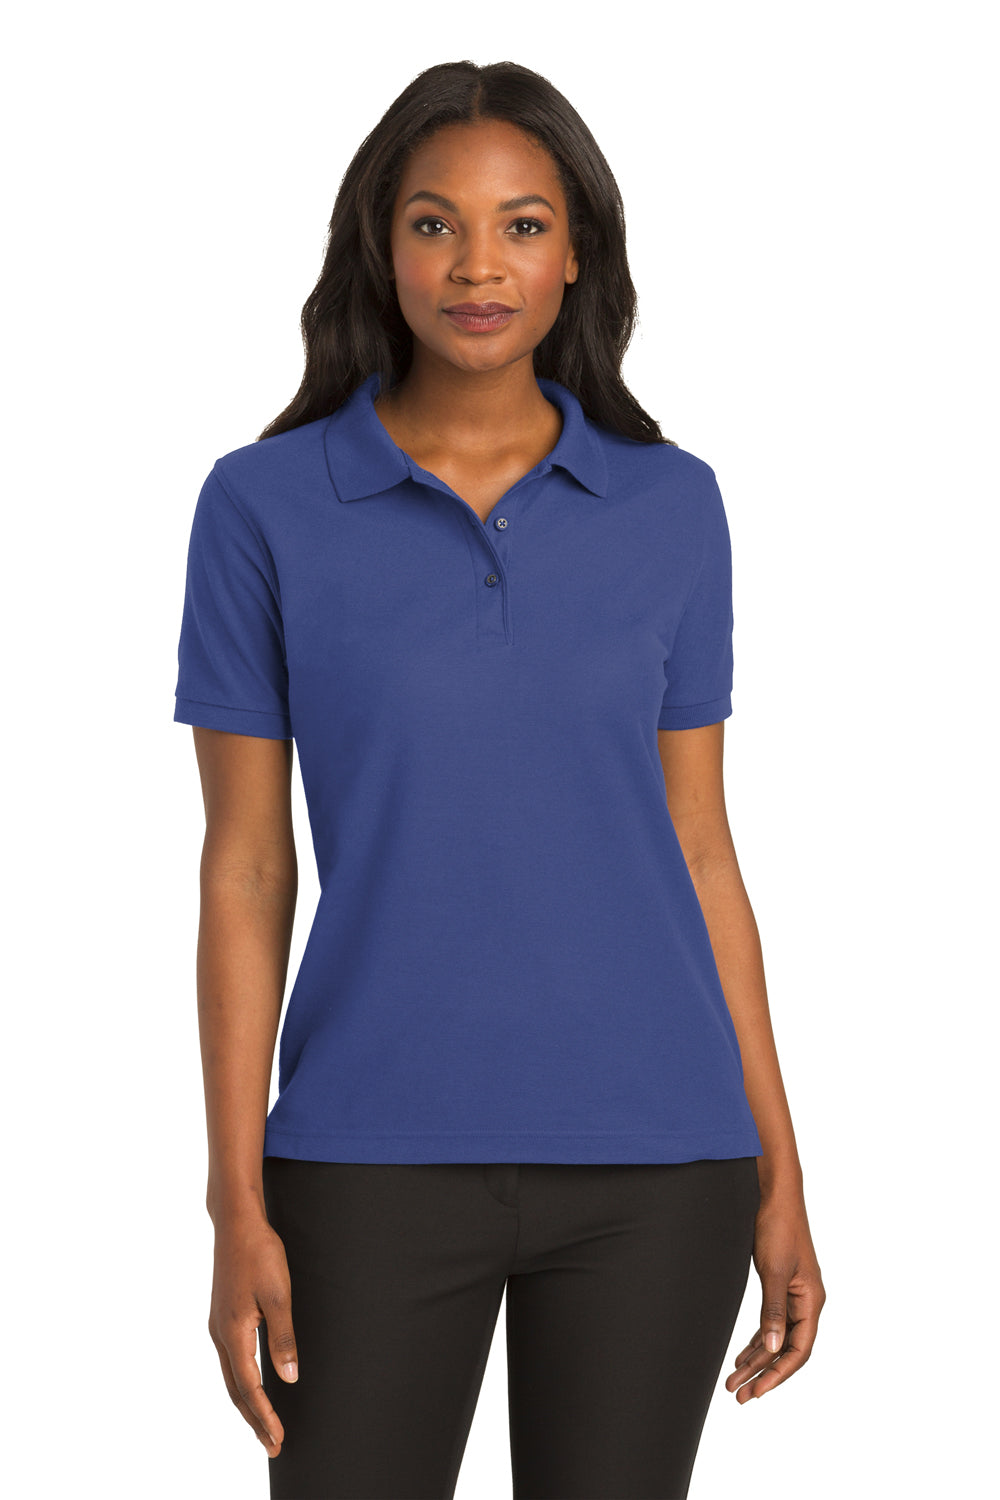 Port Authority L500 Womens Silk Touch Wrinkle Resistant Short Sleeve Polo Shirt Mediterranean Blue Front